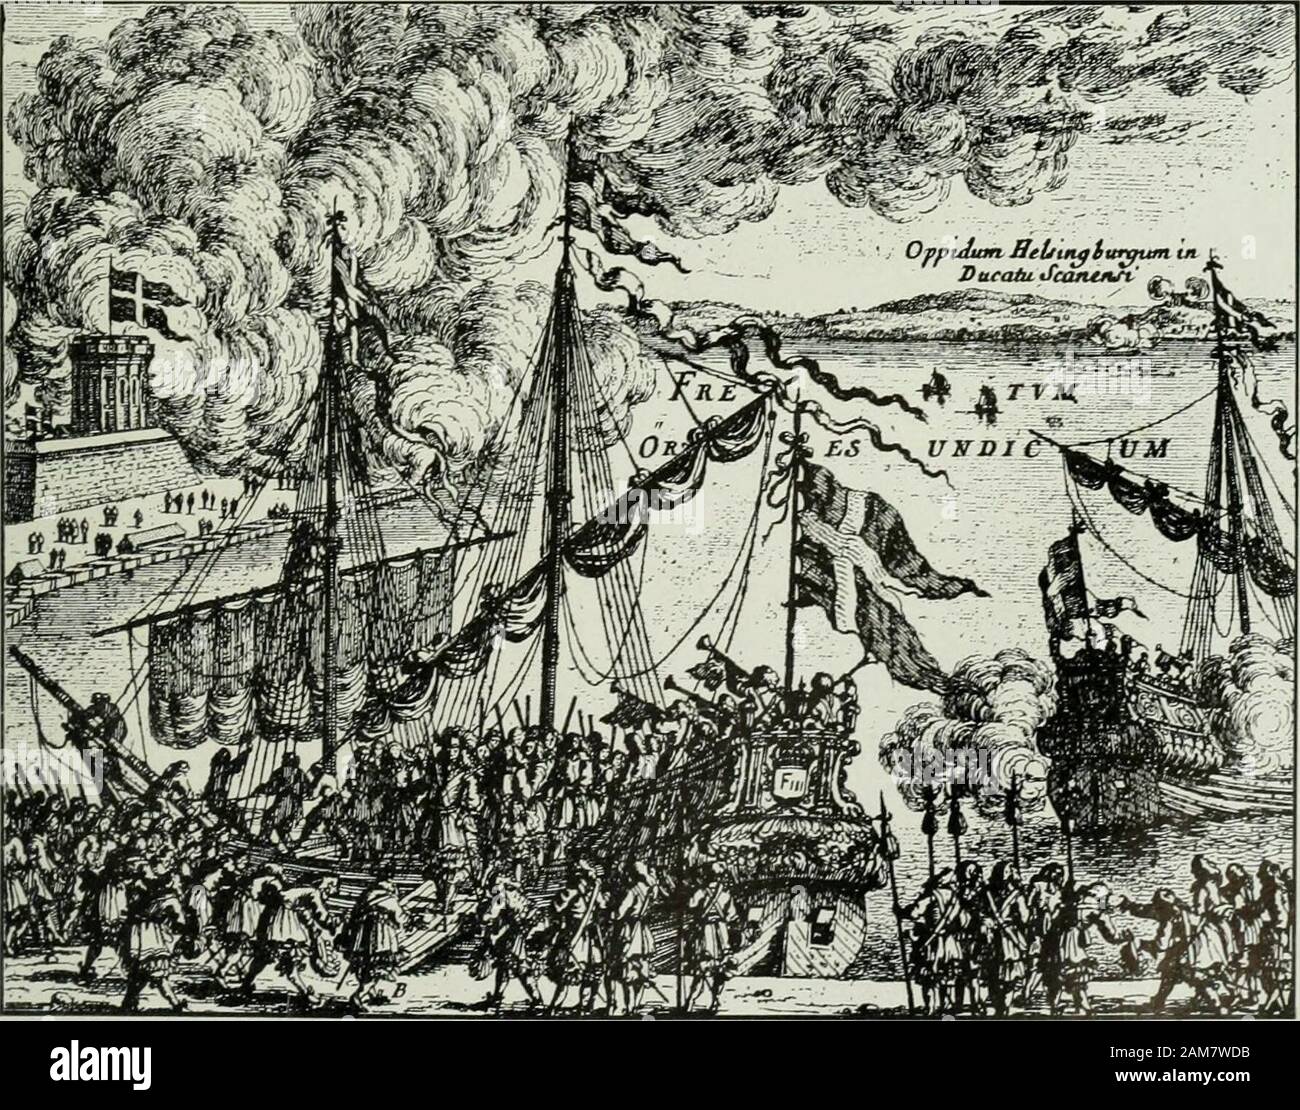 The Swedish settlements on the Delaware, their history and relation to the Indians, Dutch and English, 1638-1664, with an account of the South, the New Sweden, and the American companies, and the efforts of Sweden to regain their colony . The harljor of Amsterdam, wliere some of the vSwedish ships on their way to andfrom New .Sweden anchored. M. H.. The disembarking from a Swedish ship. From Pufendorfs ///,«/. dii Reg. dc Charles (Justave. Final Preparations and First Expedition. i 19 cost of the expedition had now reached the sum of about 46,000florins.3^ The tobacco was to be sold in Sweden, Stock Photo